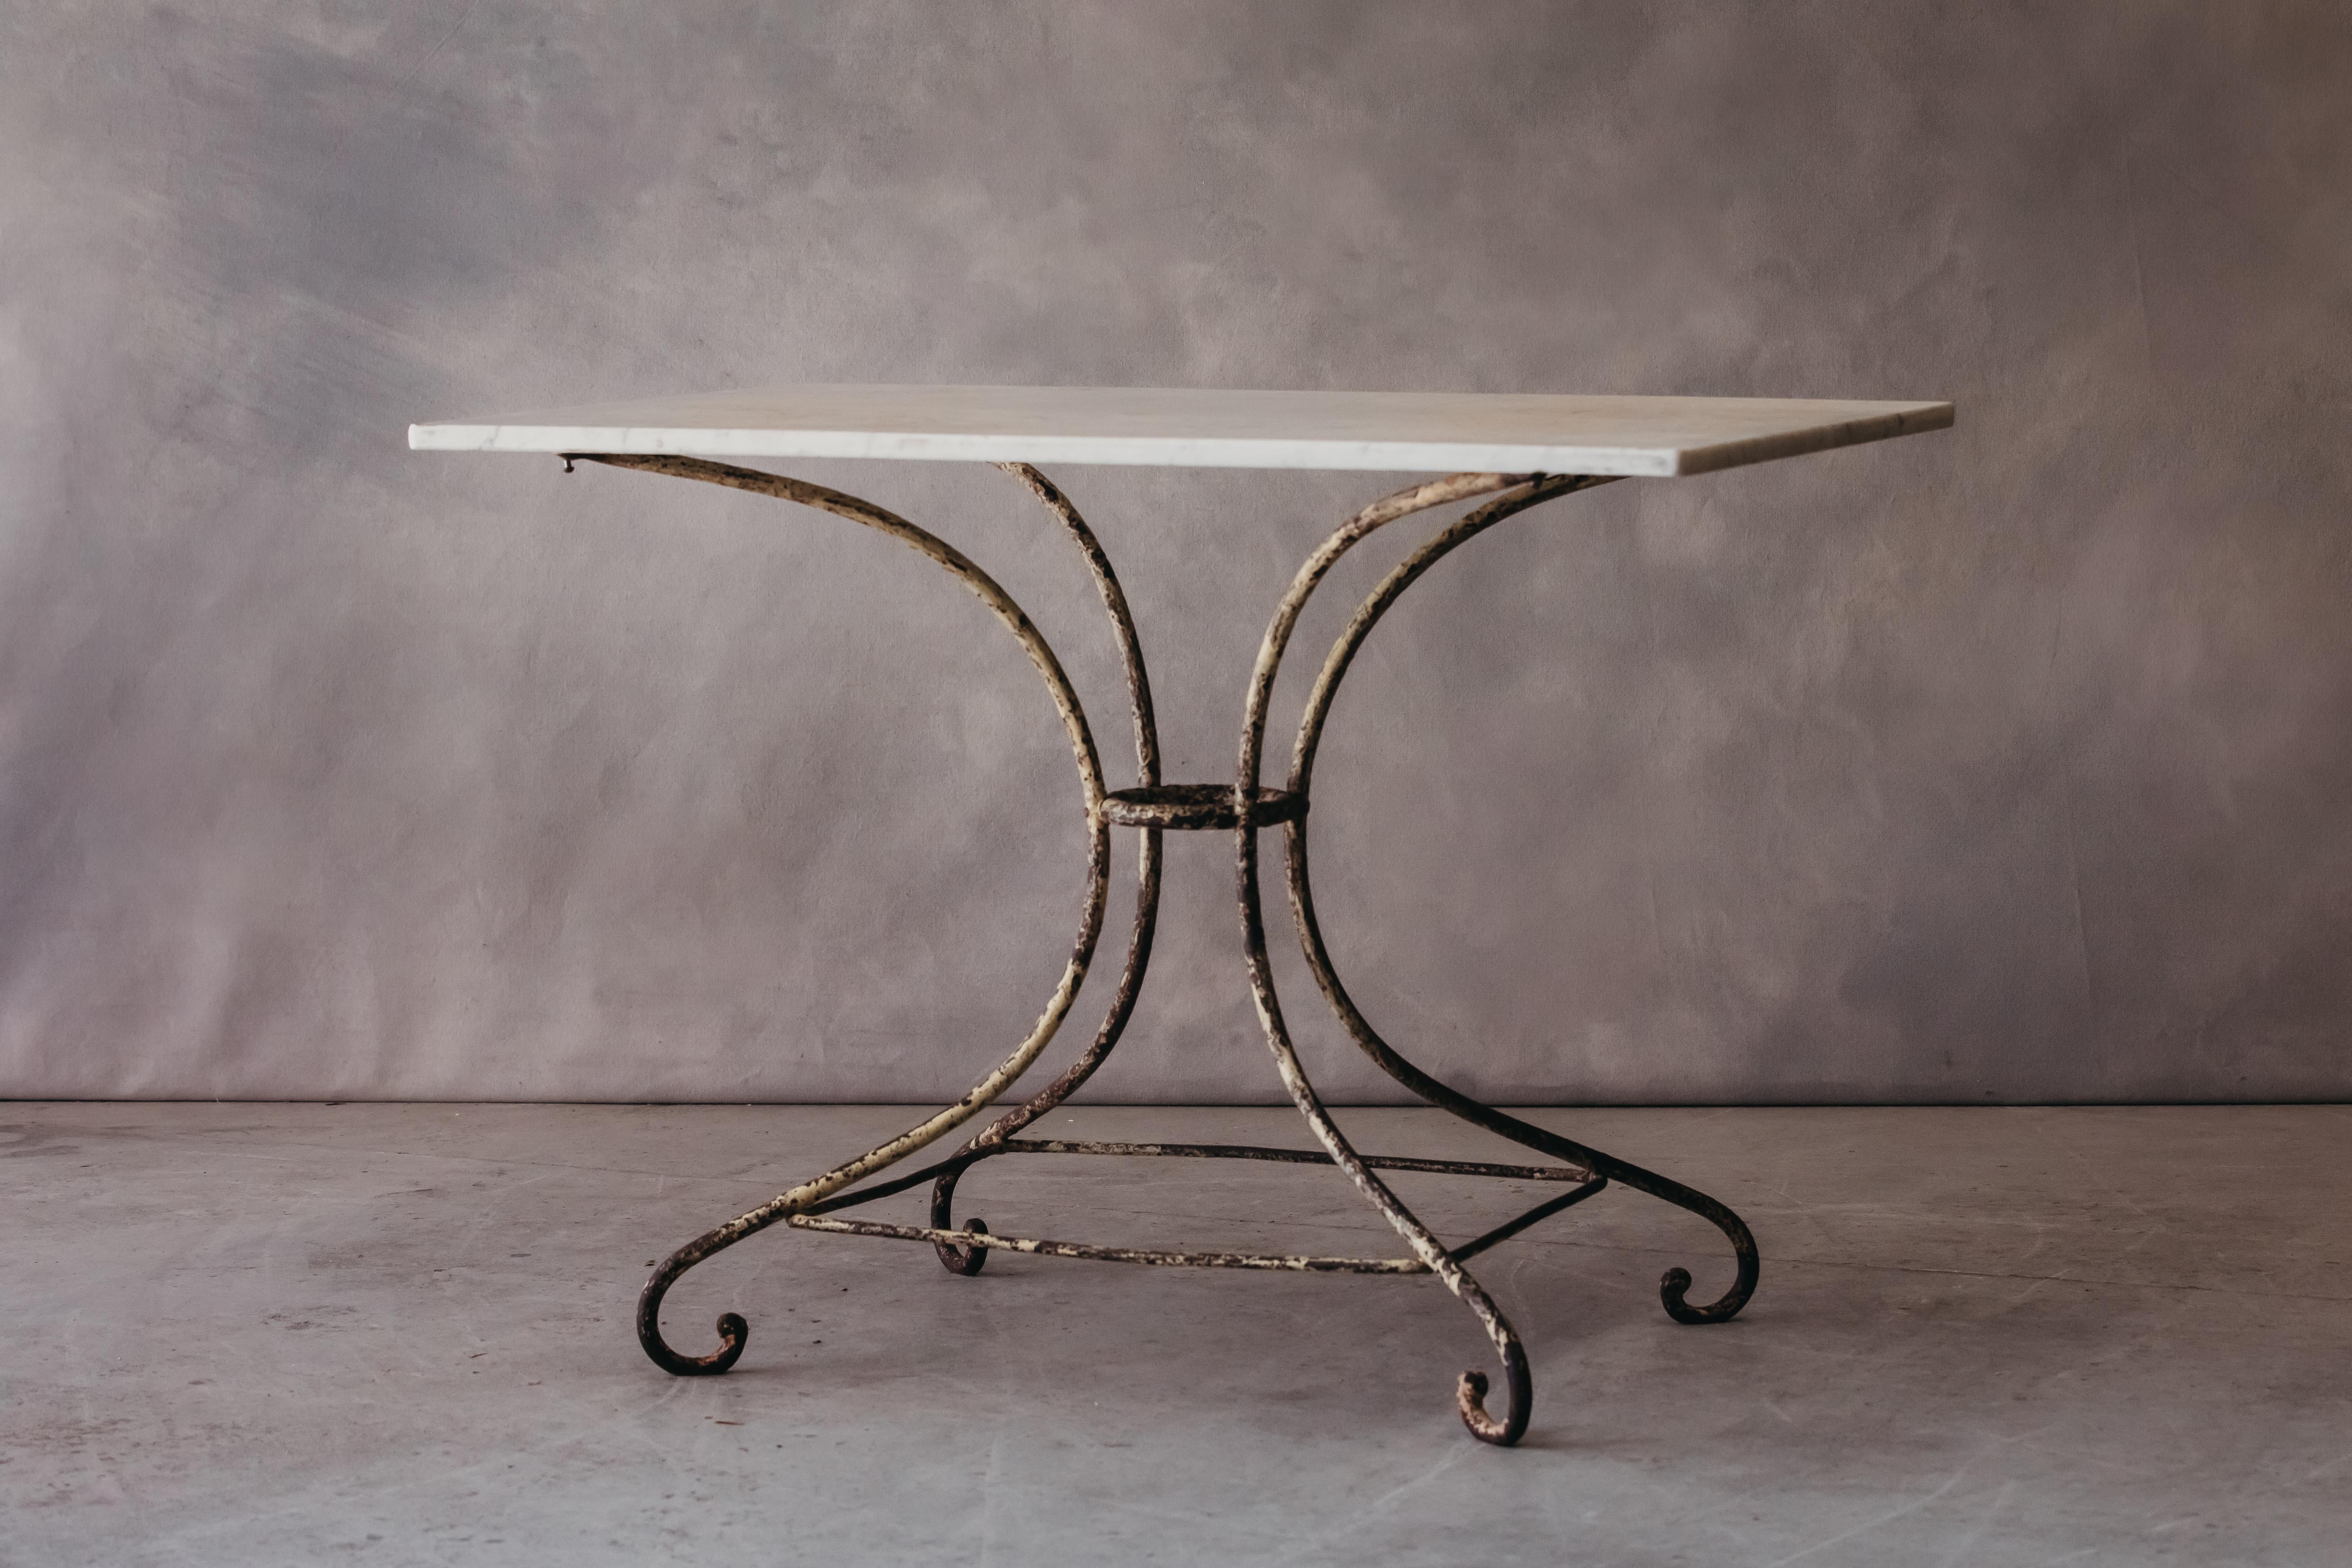 Vintage Marble Bistro Table From France, circa 1960. Elegant model with fantastic original color and patina.